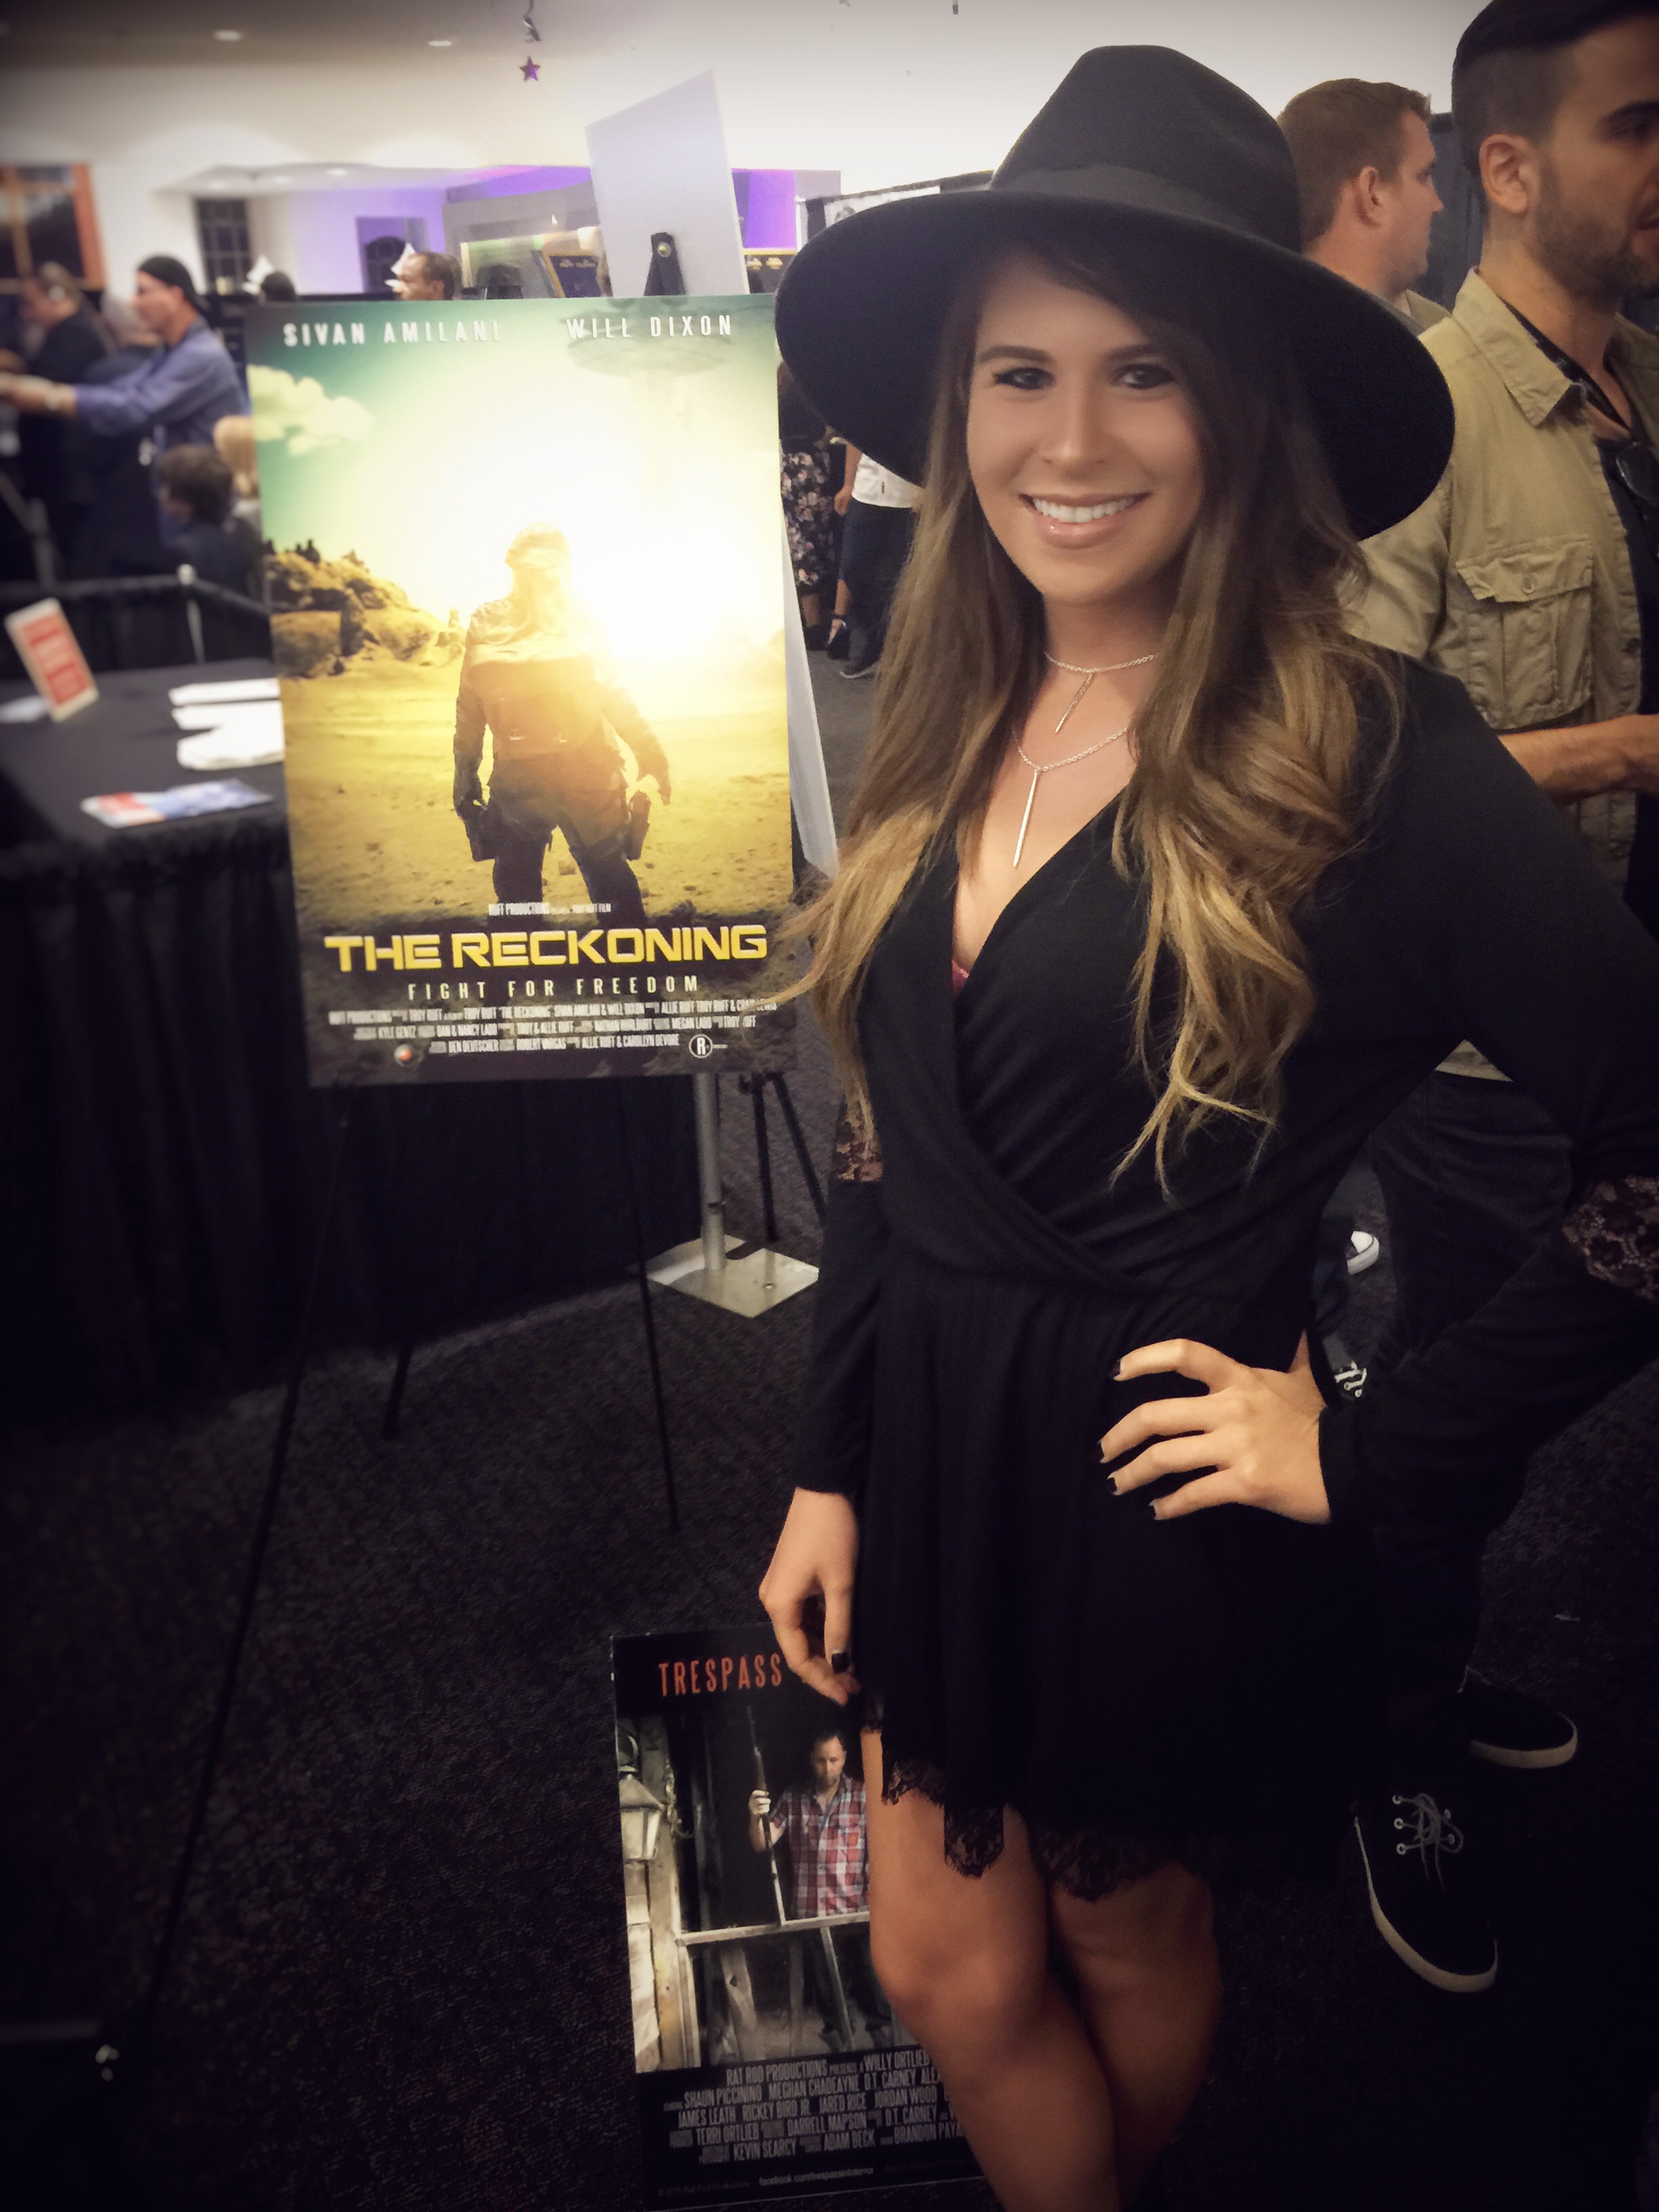 Sivan Amilani supporting her film, The Reckoning, at AOF Film Festival 2015